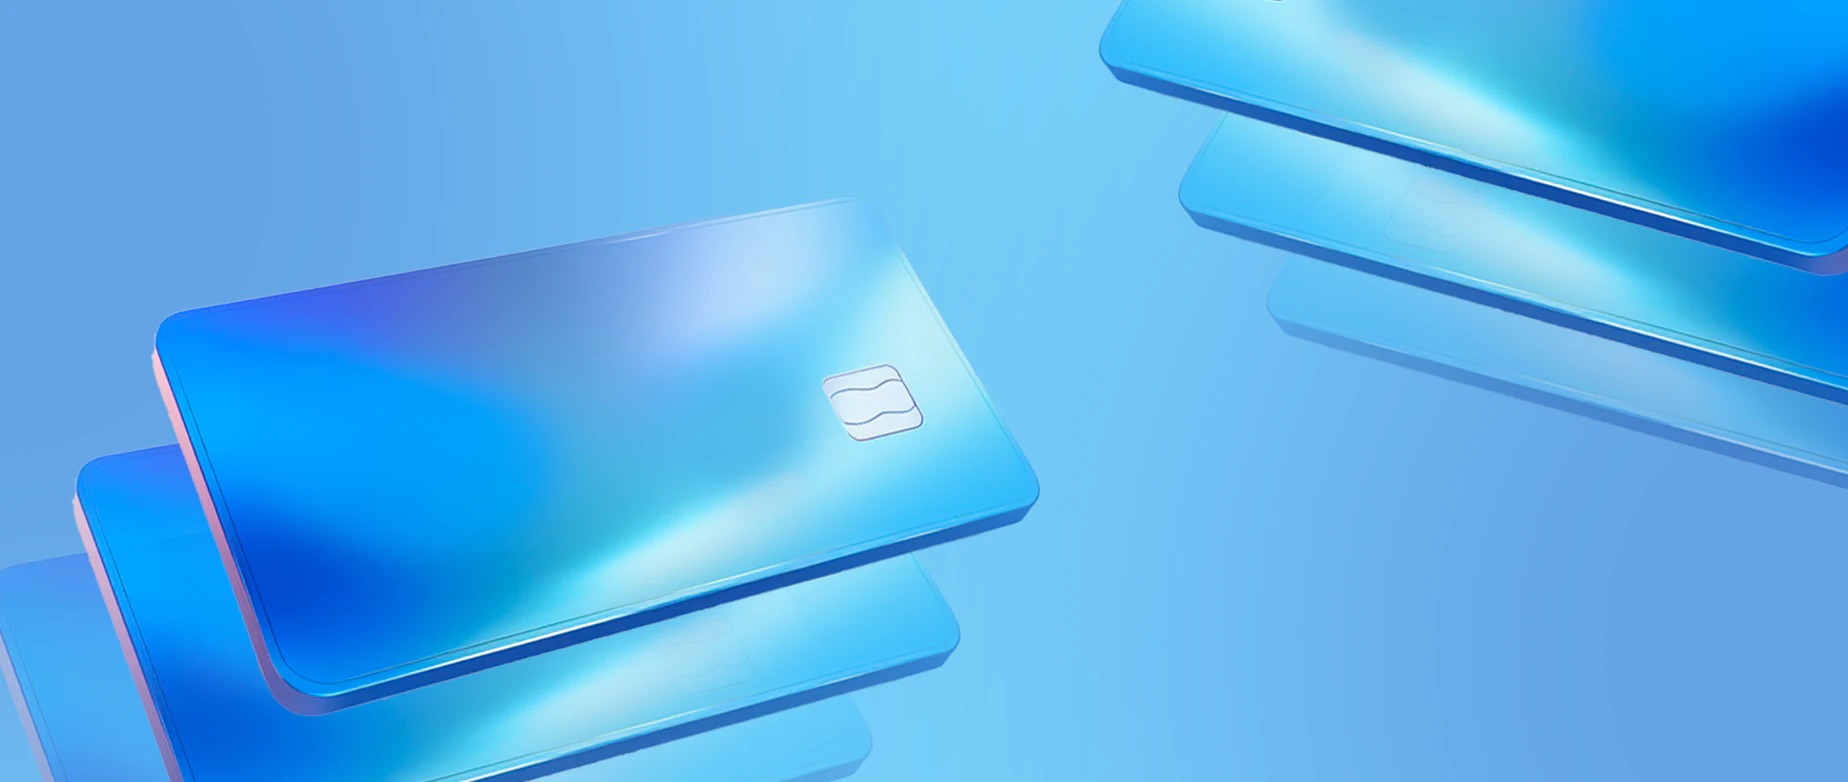 What Small Business Credit Cards Do Not Require A Minimum Payment Due Every Month?